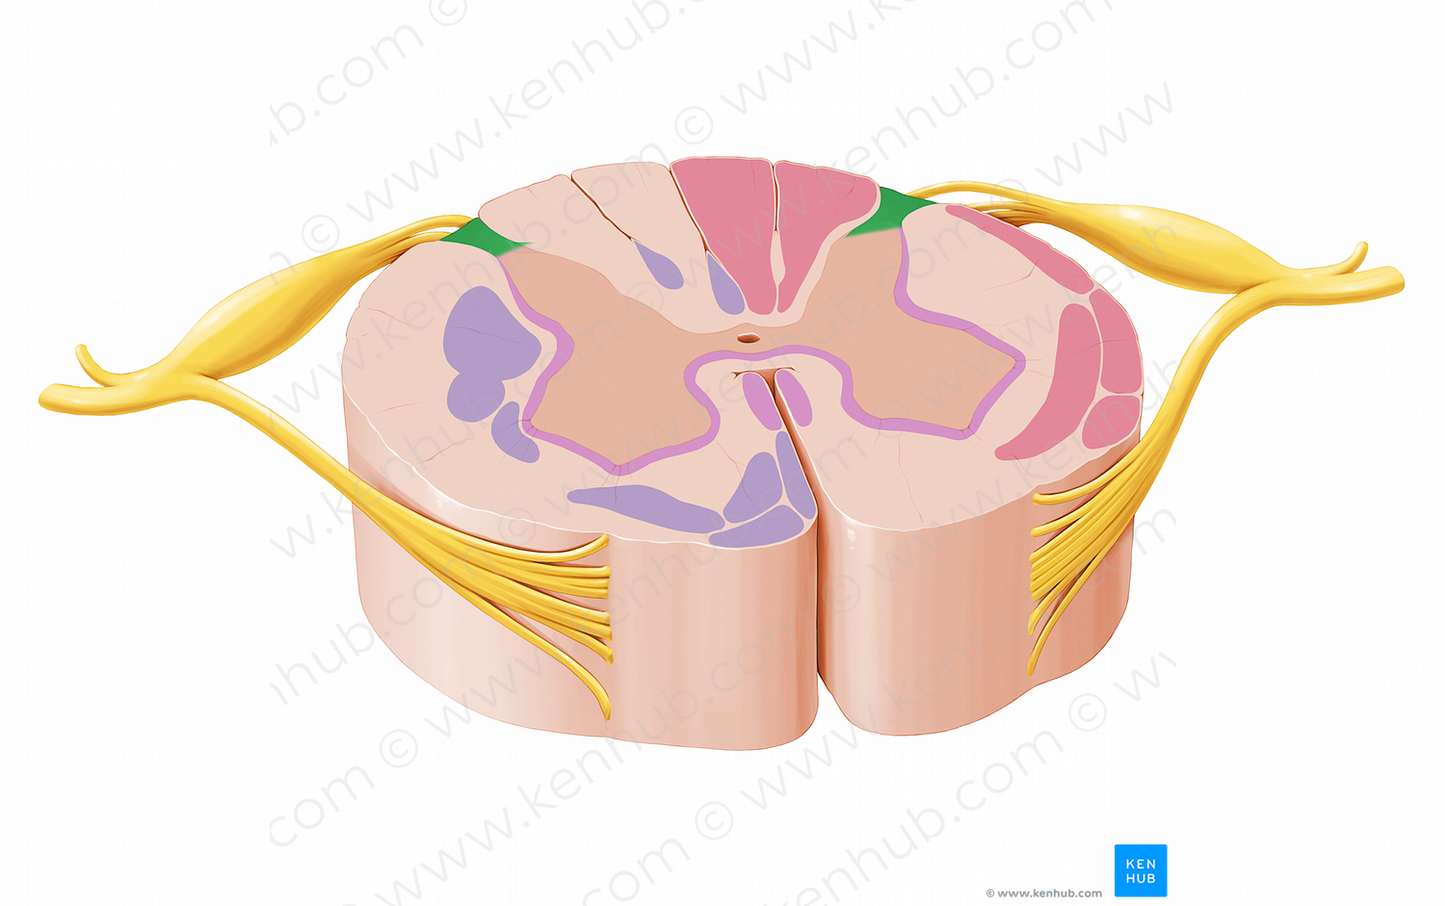 Posterolateral tract (#12032)